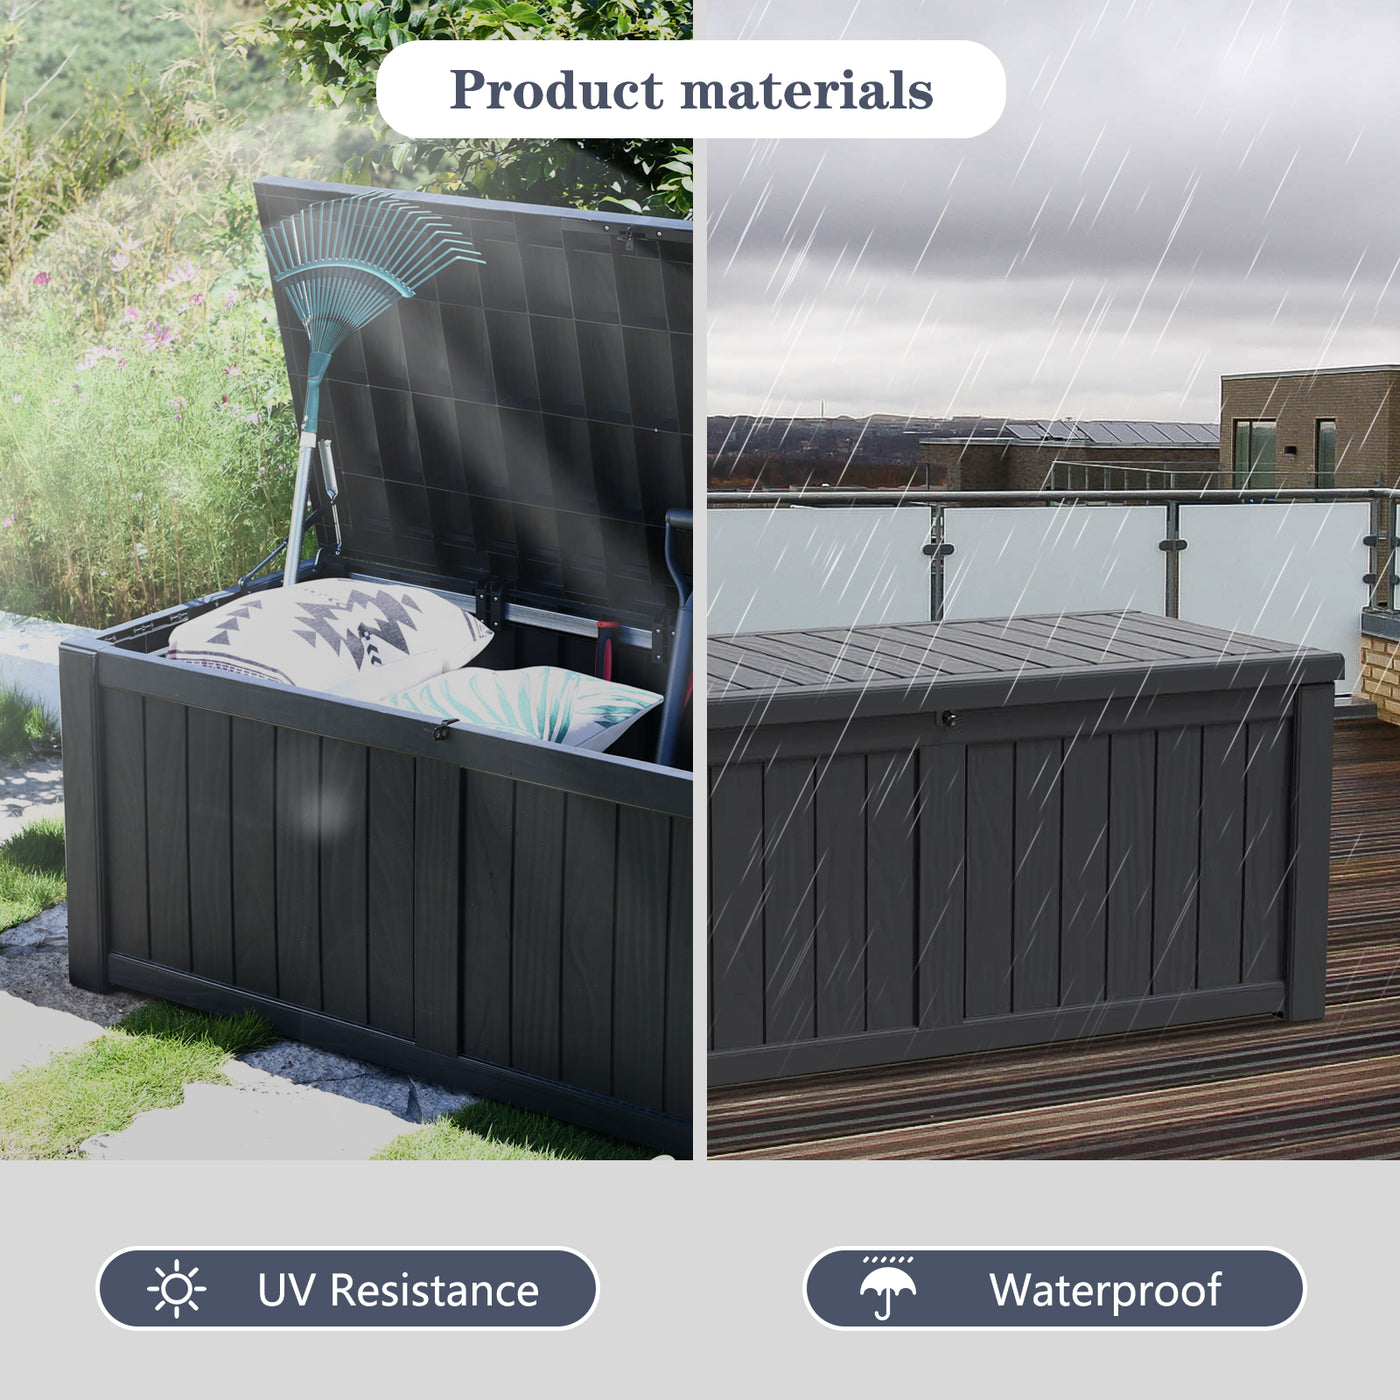 120 Gallon Waterproof Deck Box Patio Furniture Organization Container with Lockable Lid, Resin Outdoor Storage Box for Garden, Yard, Poolside, Black